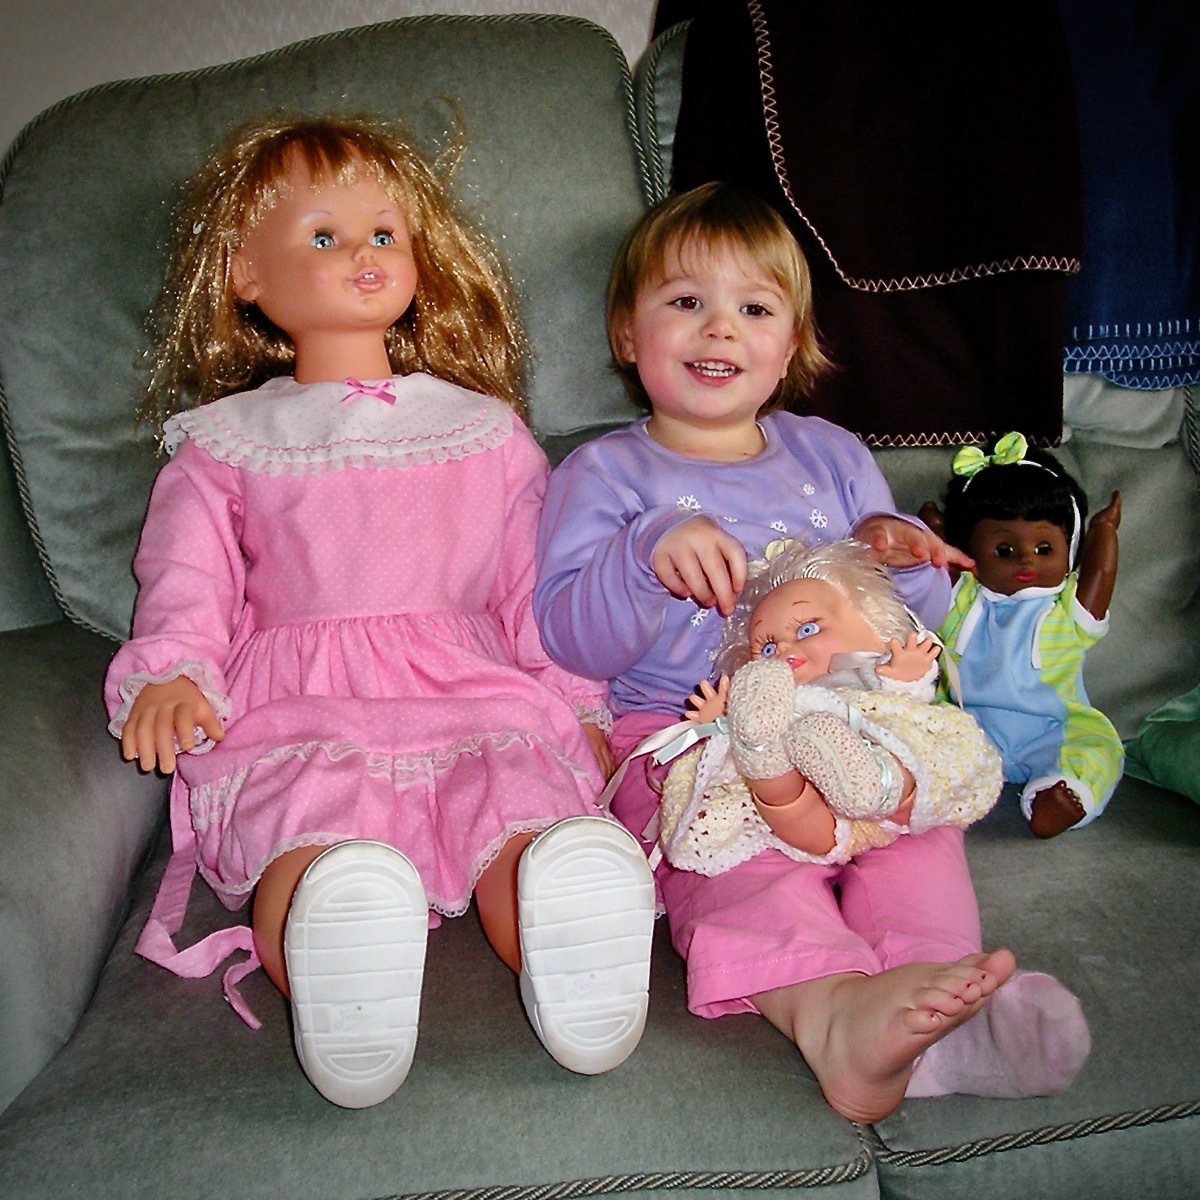 Little girl and three dolls, one bigger than her